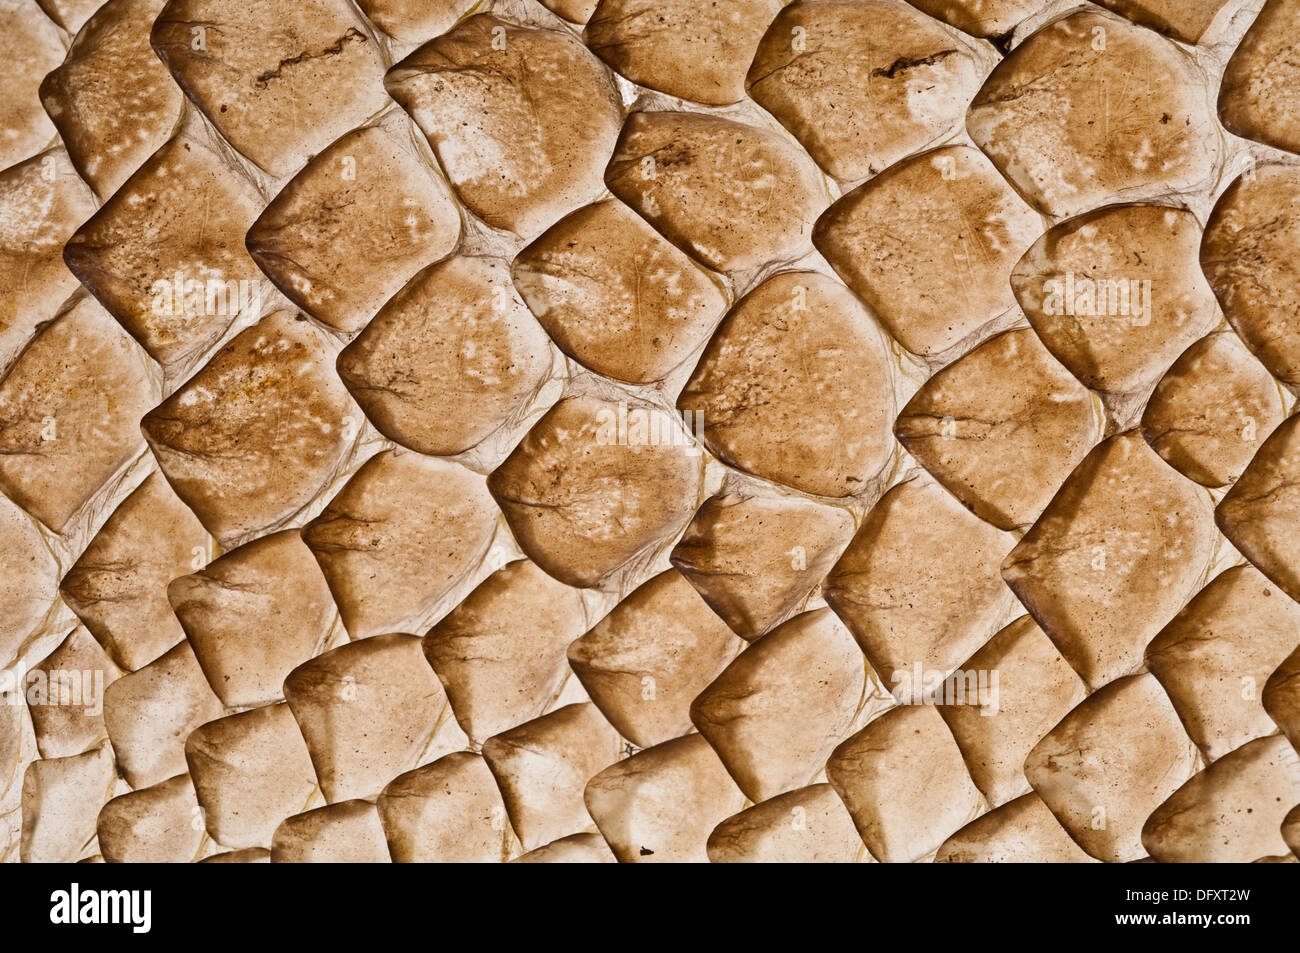 Dried skin shed by a lizard as part of growth process. Stock Photo